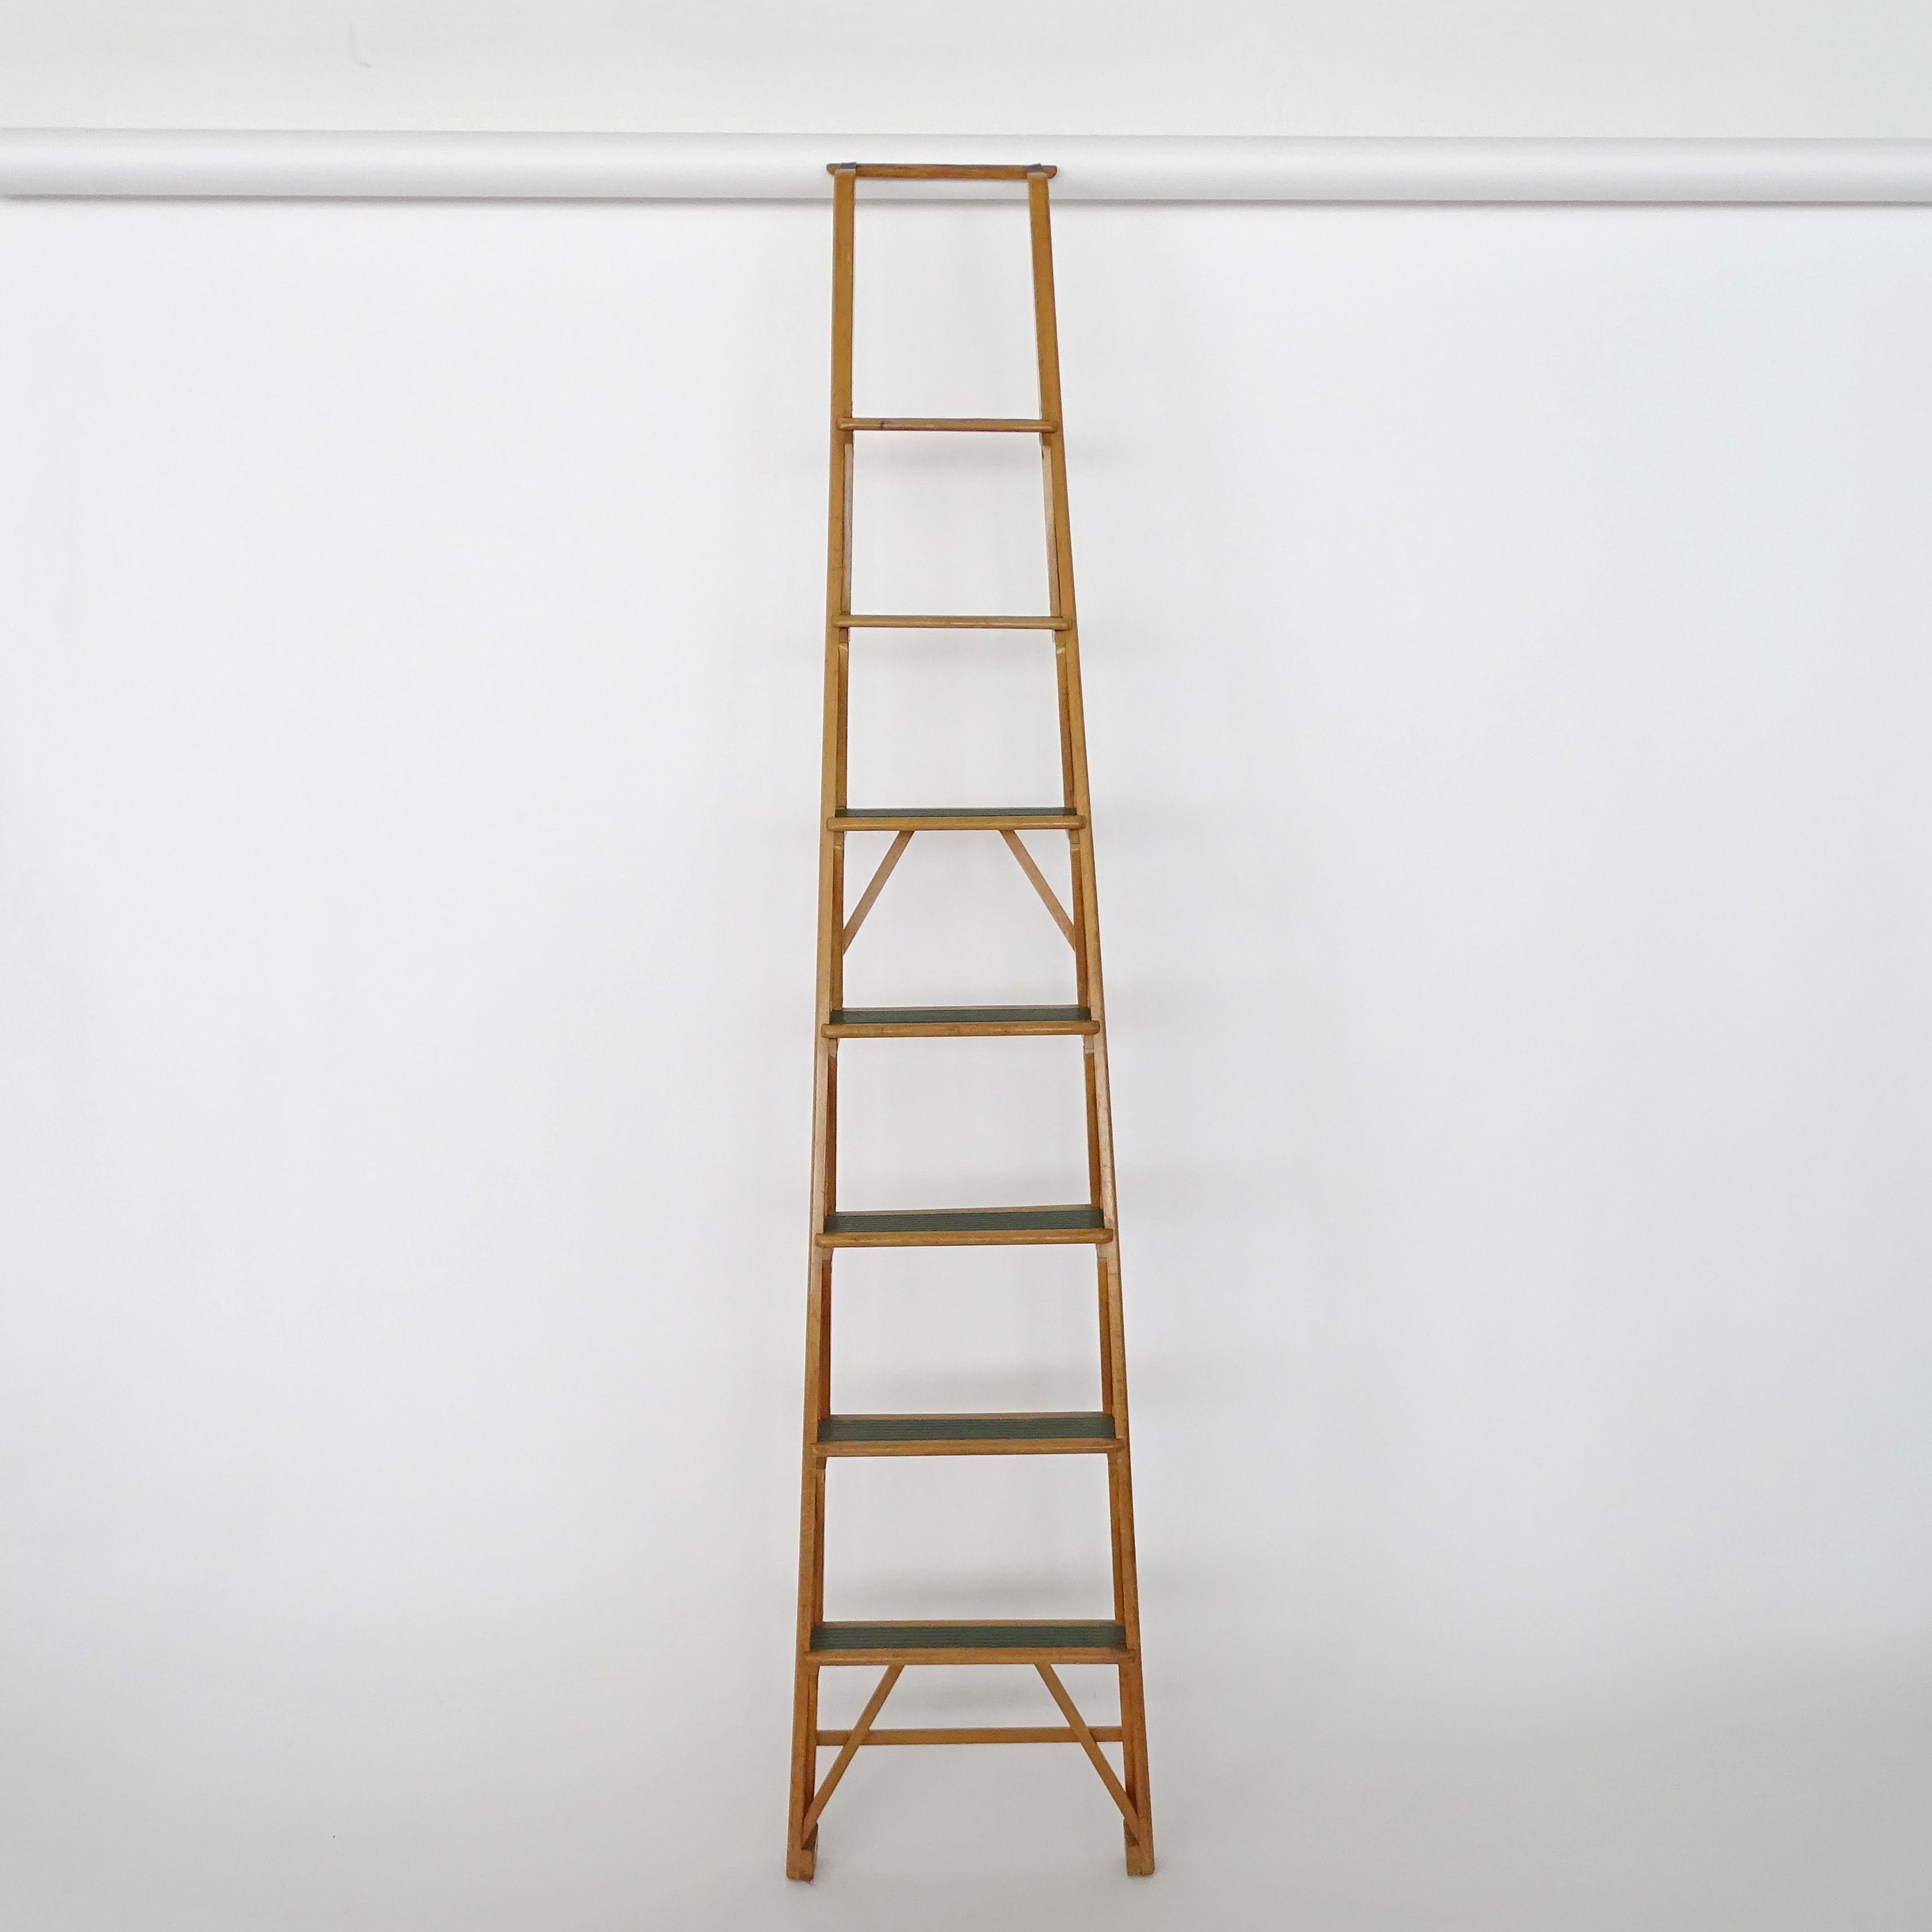 Italian Architectural library ladder 
Attributed to Franco Albini, 1950s.